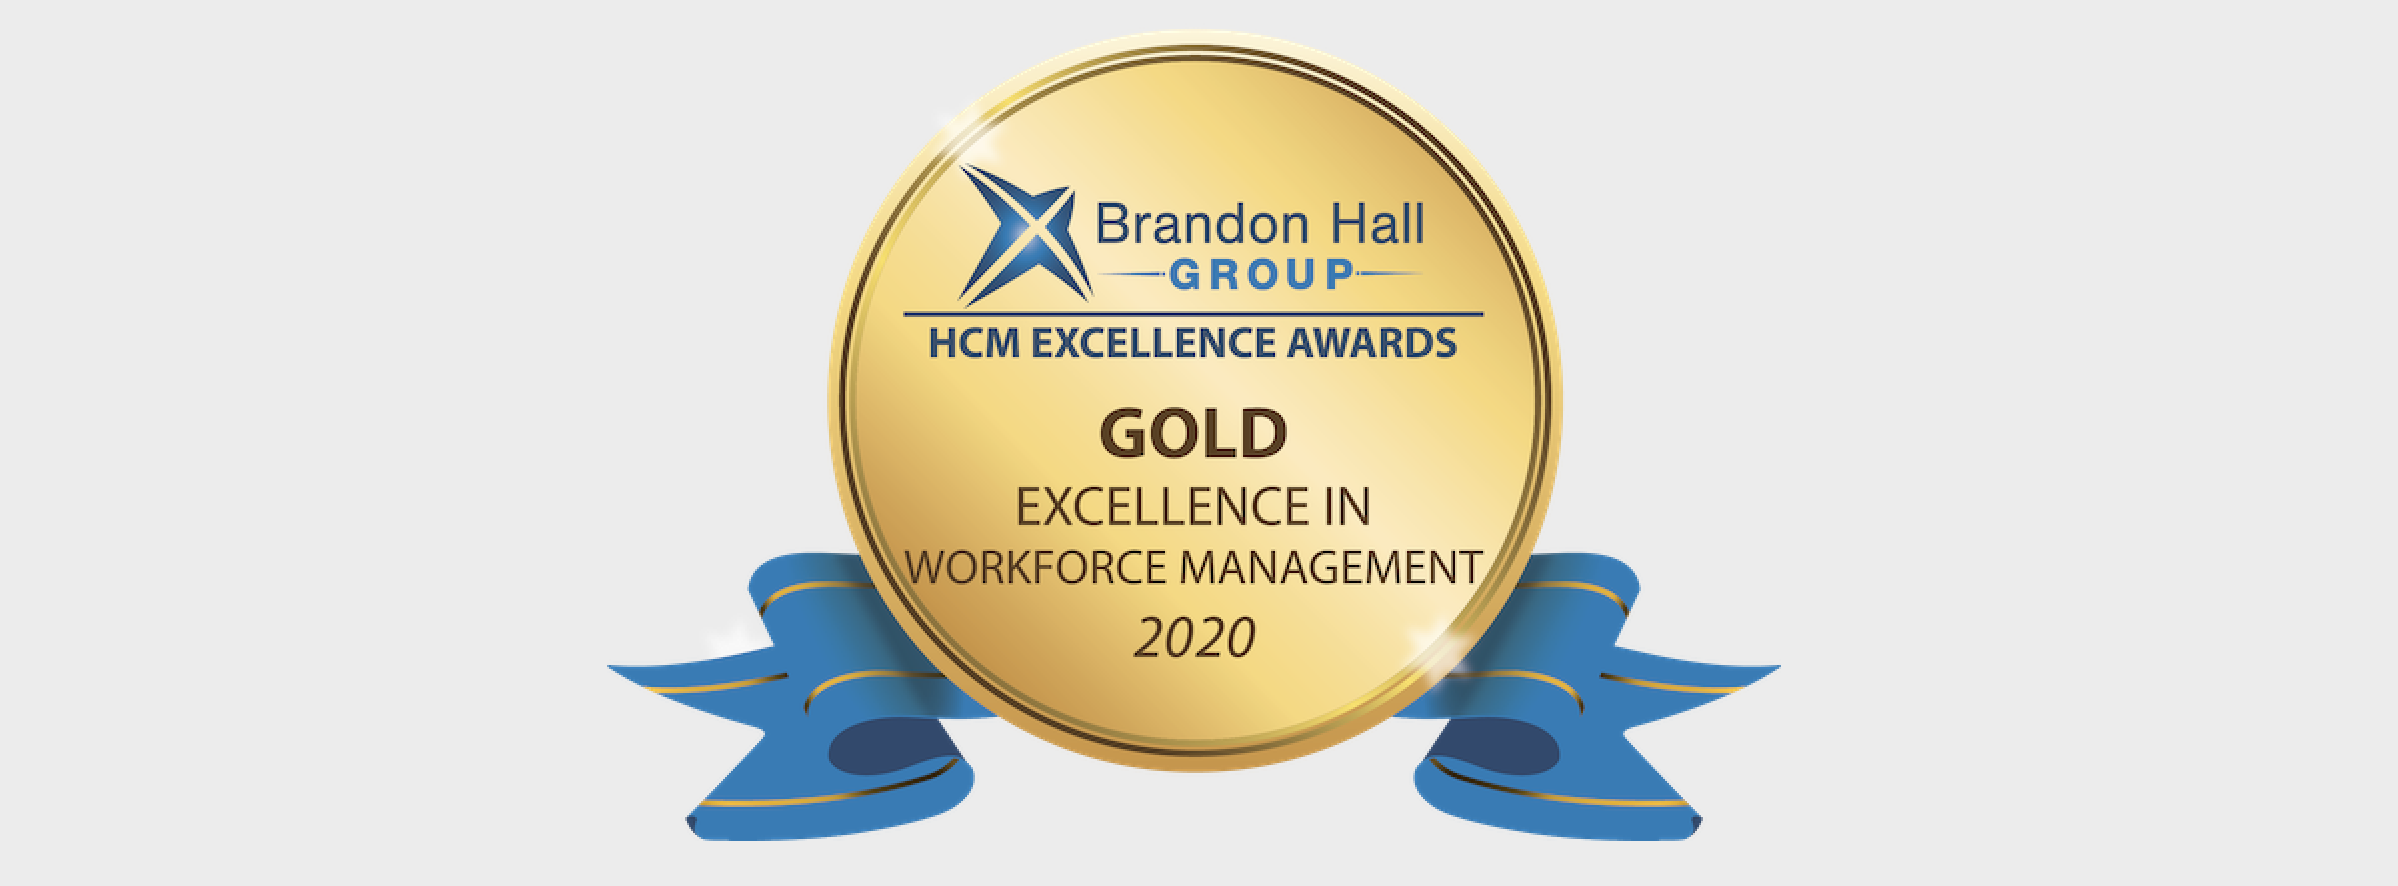 Brandon Hall HCM Excellence Awards - Excellence in Workforce Management - marketsource